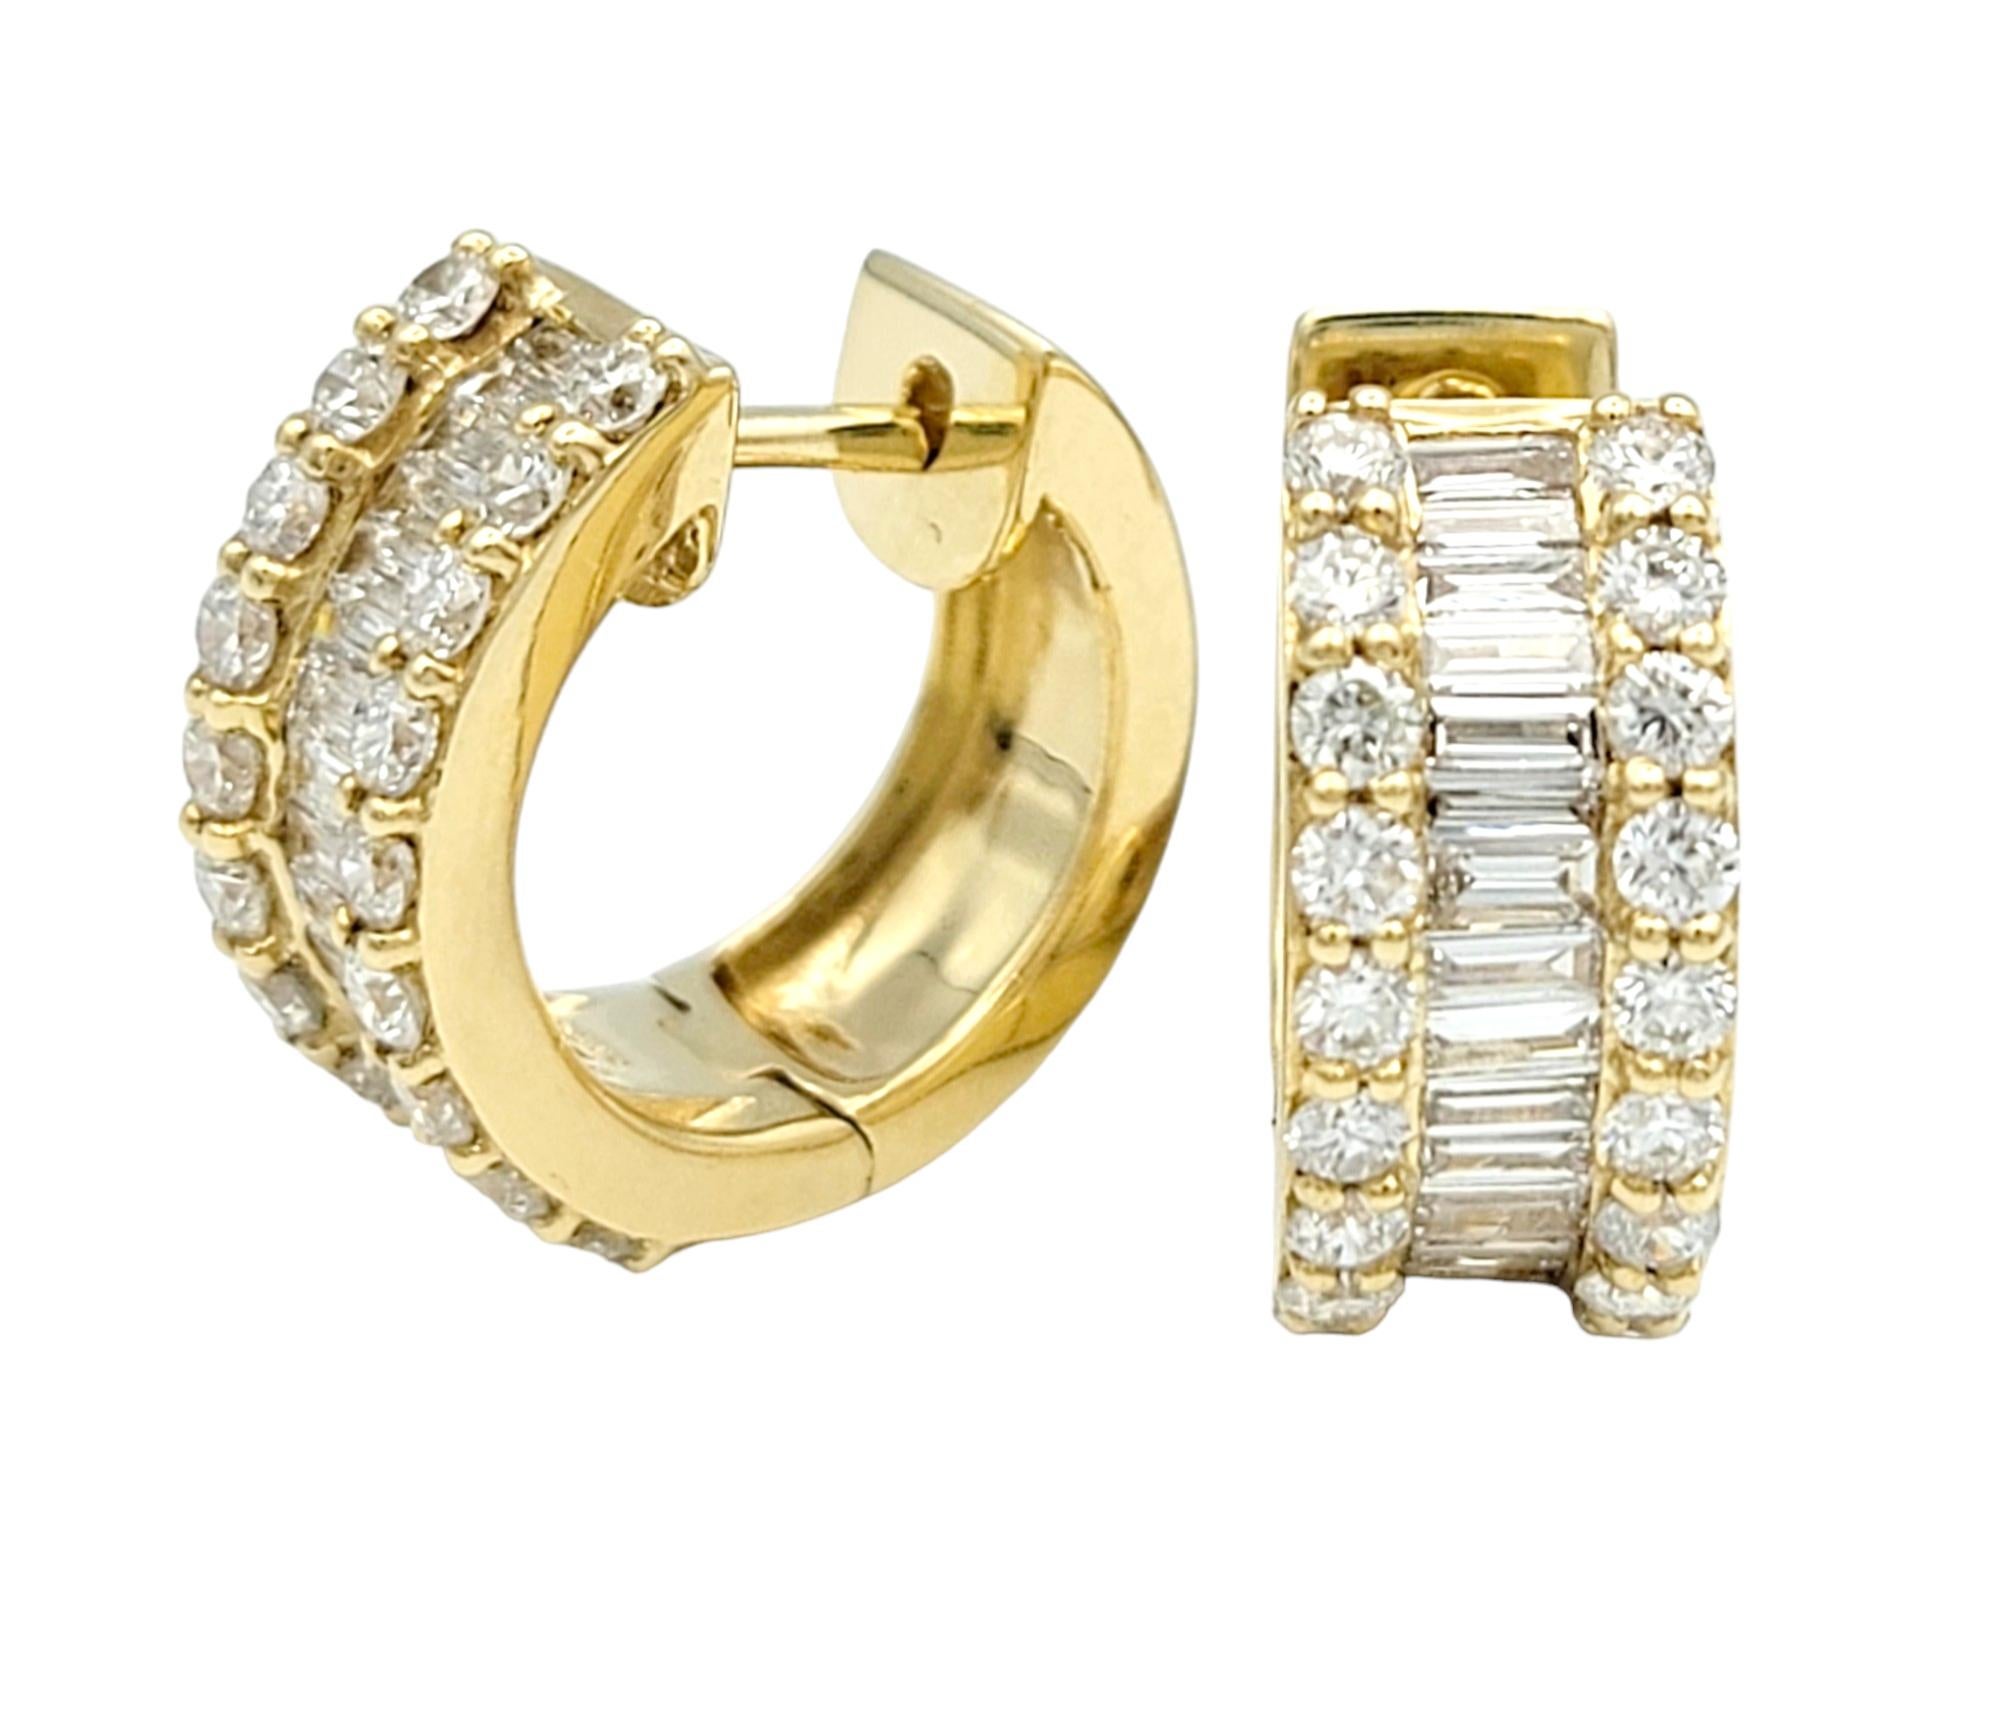 These dazzling diamond huggie hoop earrings, set in radiant 18 karat yellow gold, exude a captivating and refined elegance. The center of each hoop is adorned with a row of baguette diamonds, adding a sleek and contemporary element to the design.